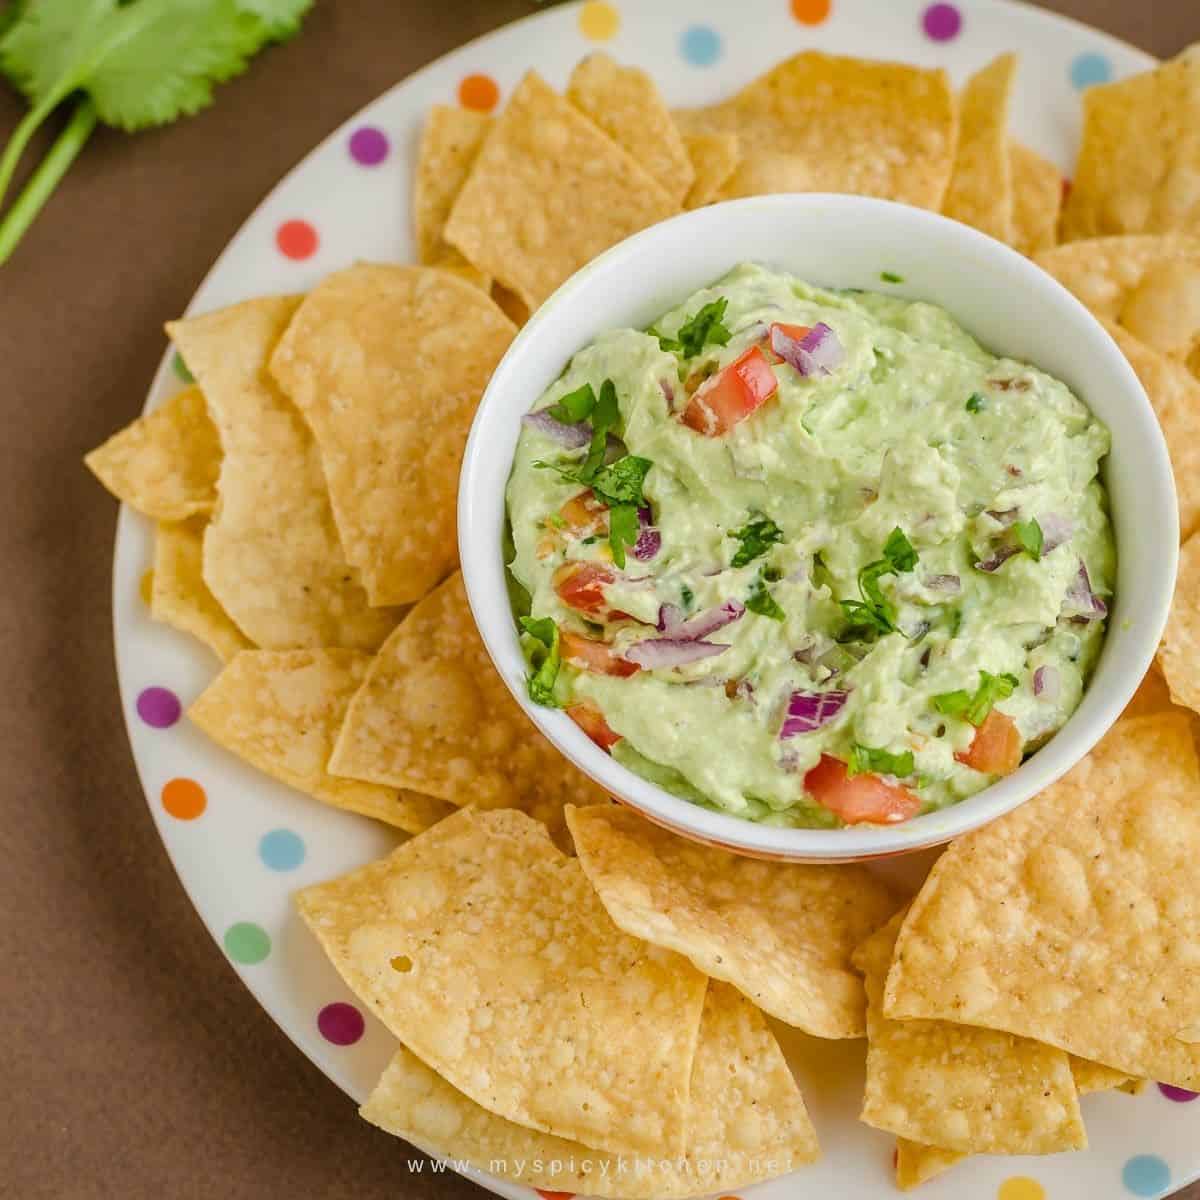 Bowl dip and chip on a plate.